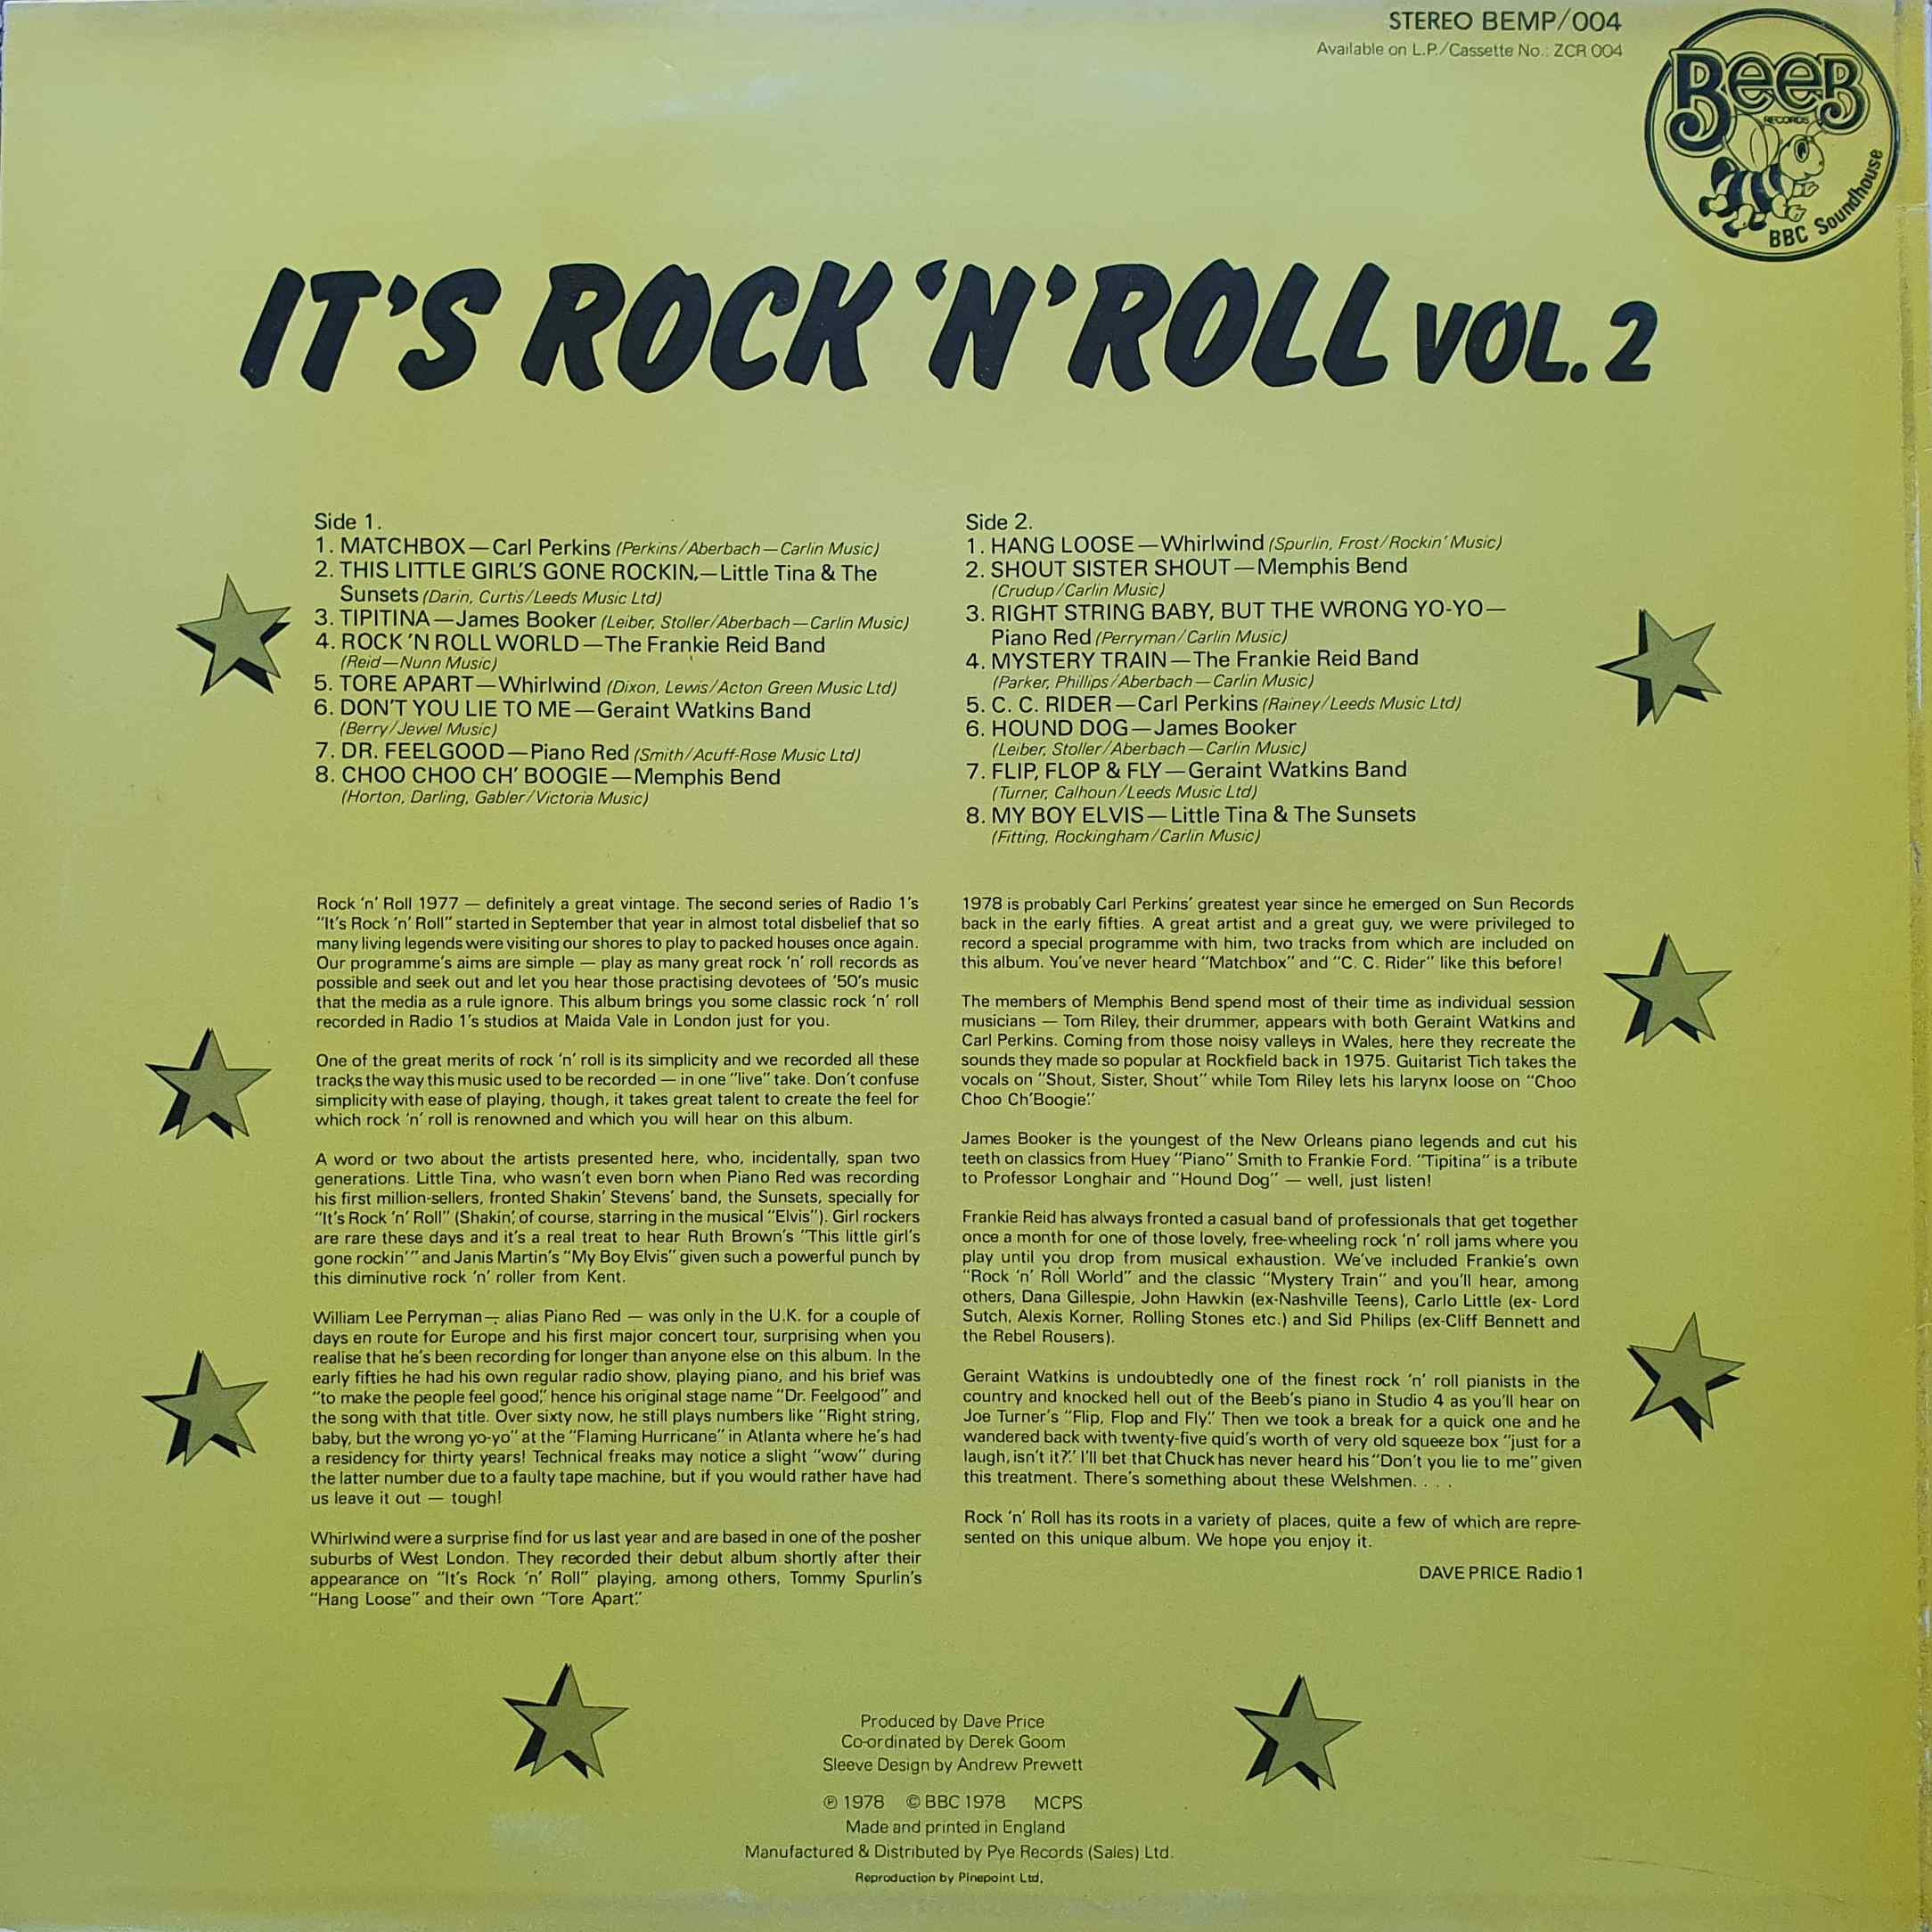 Picture of BEMP 004 Its rock n roll - Volume 2 by artist Various from the BBC records and Tapes library